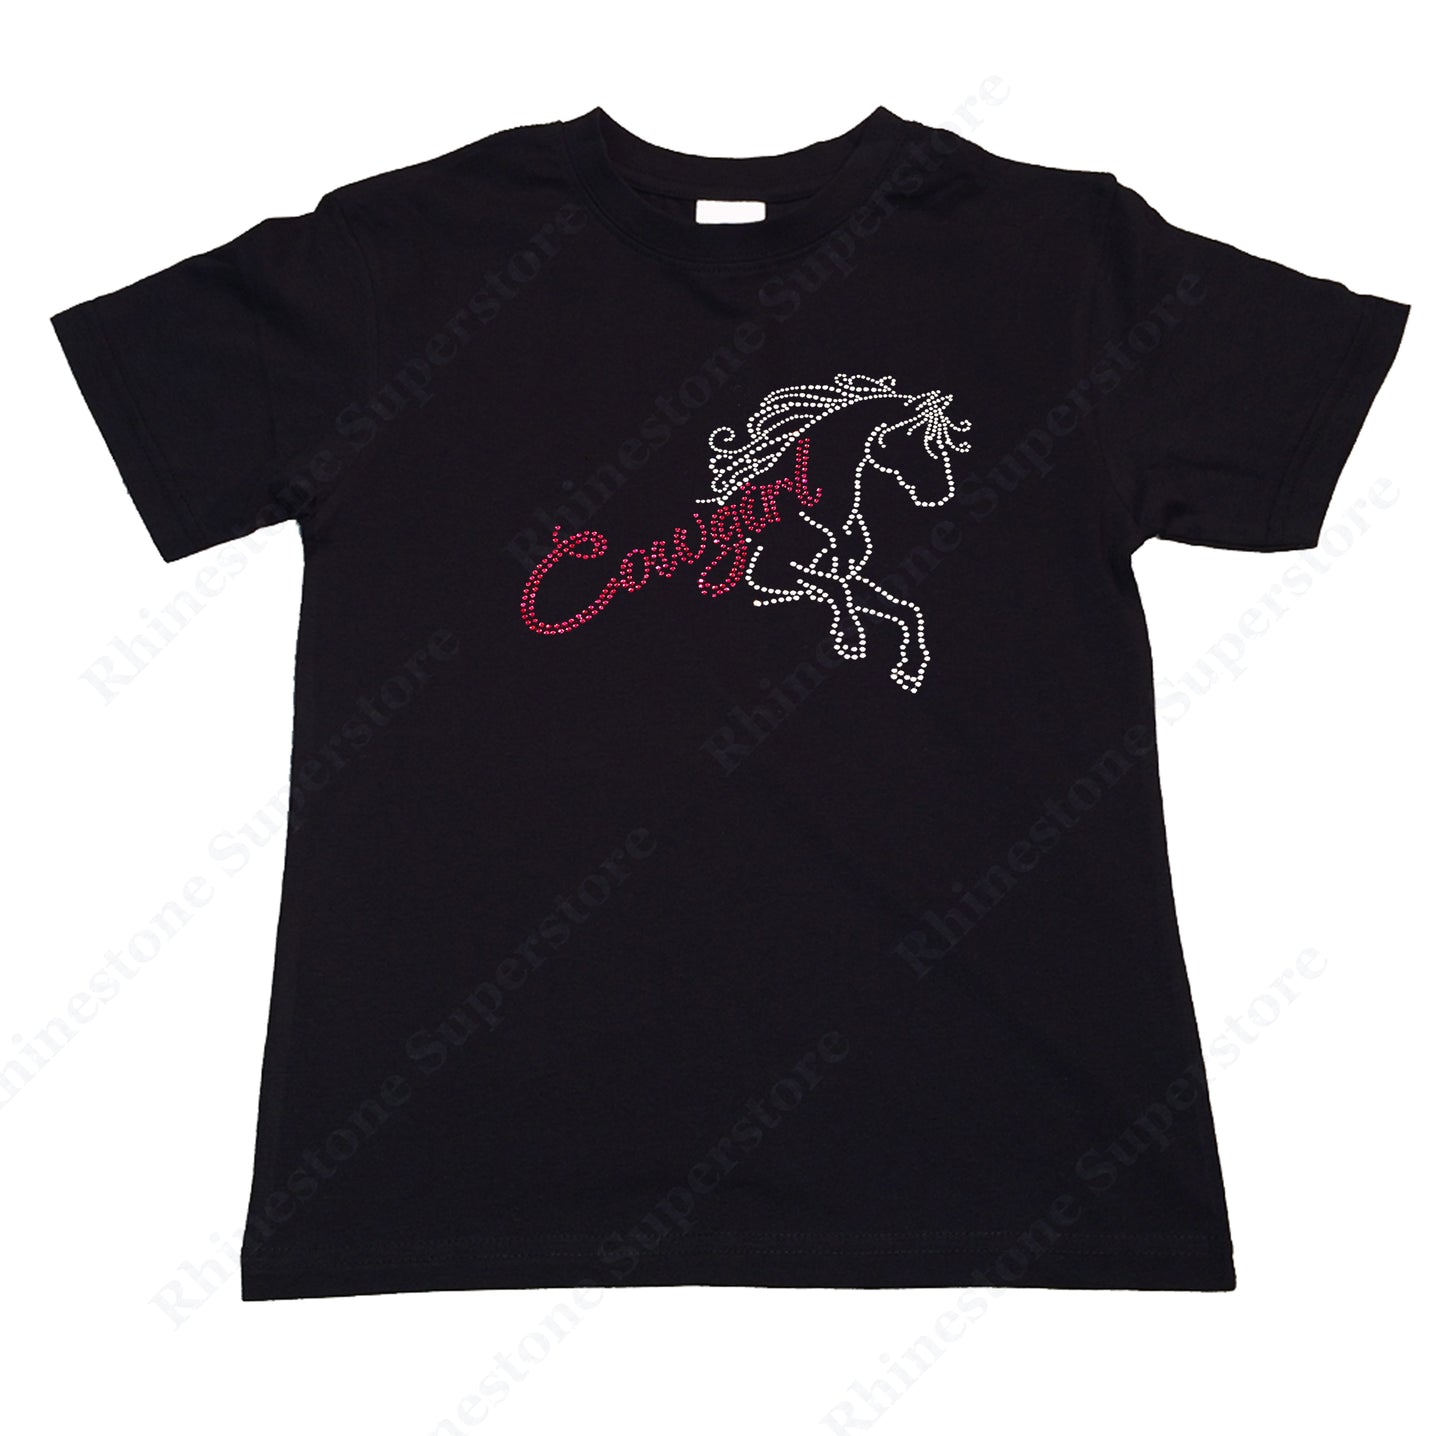 Girls Rhinestone T-Shirt " Pink Cowgirl with Horse in Rhinestones " Kids Size 3 to 14 Available